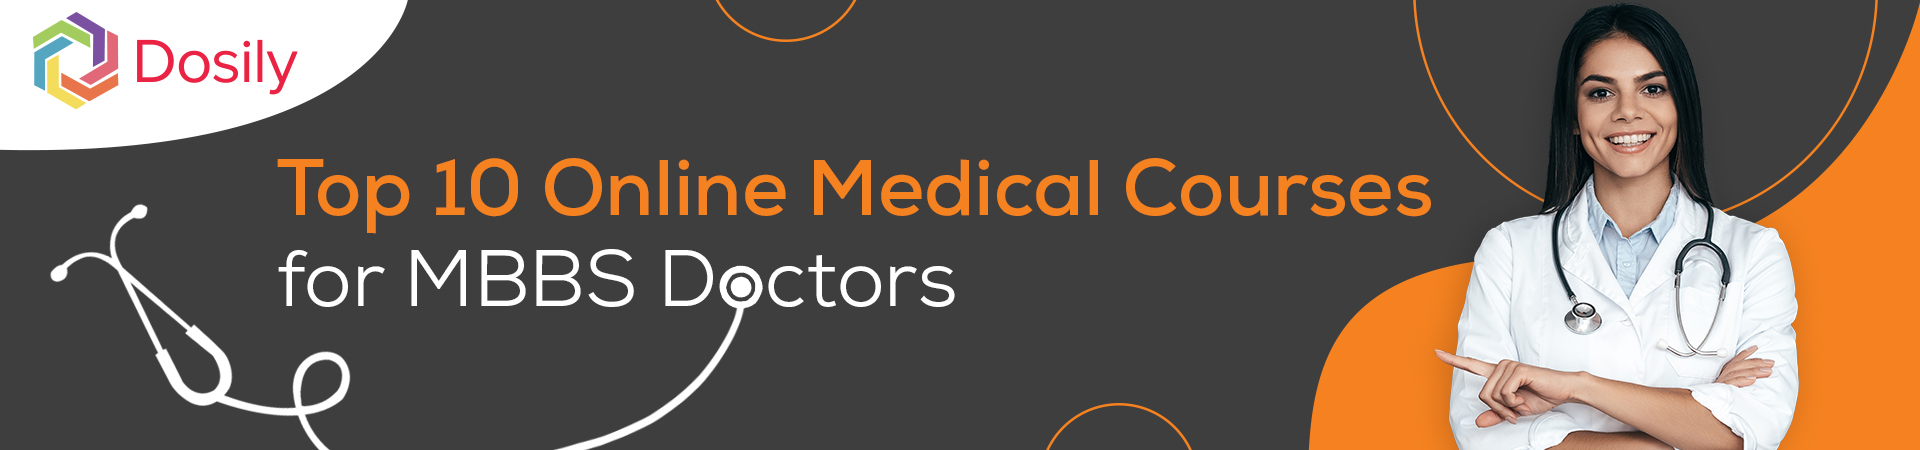 Medical courses for MBBS Doctors